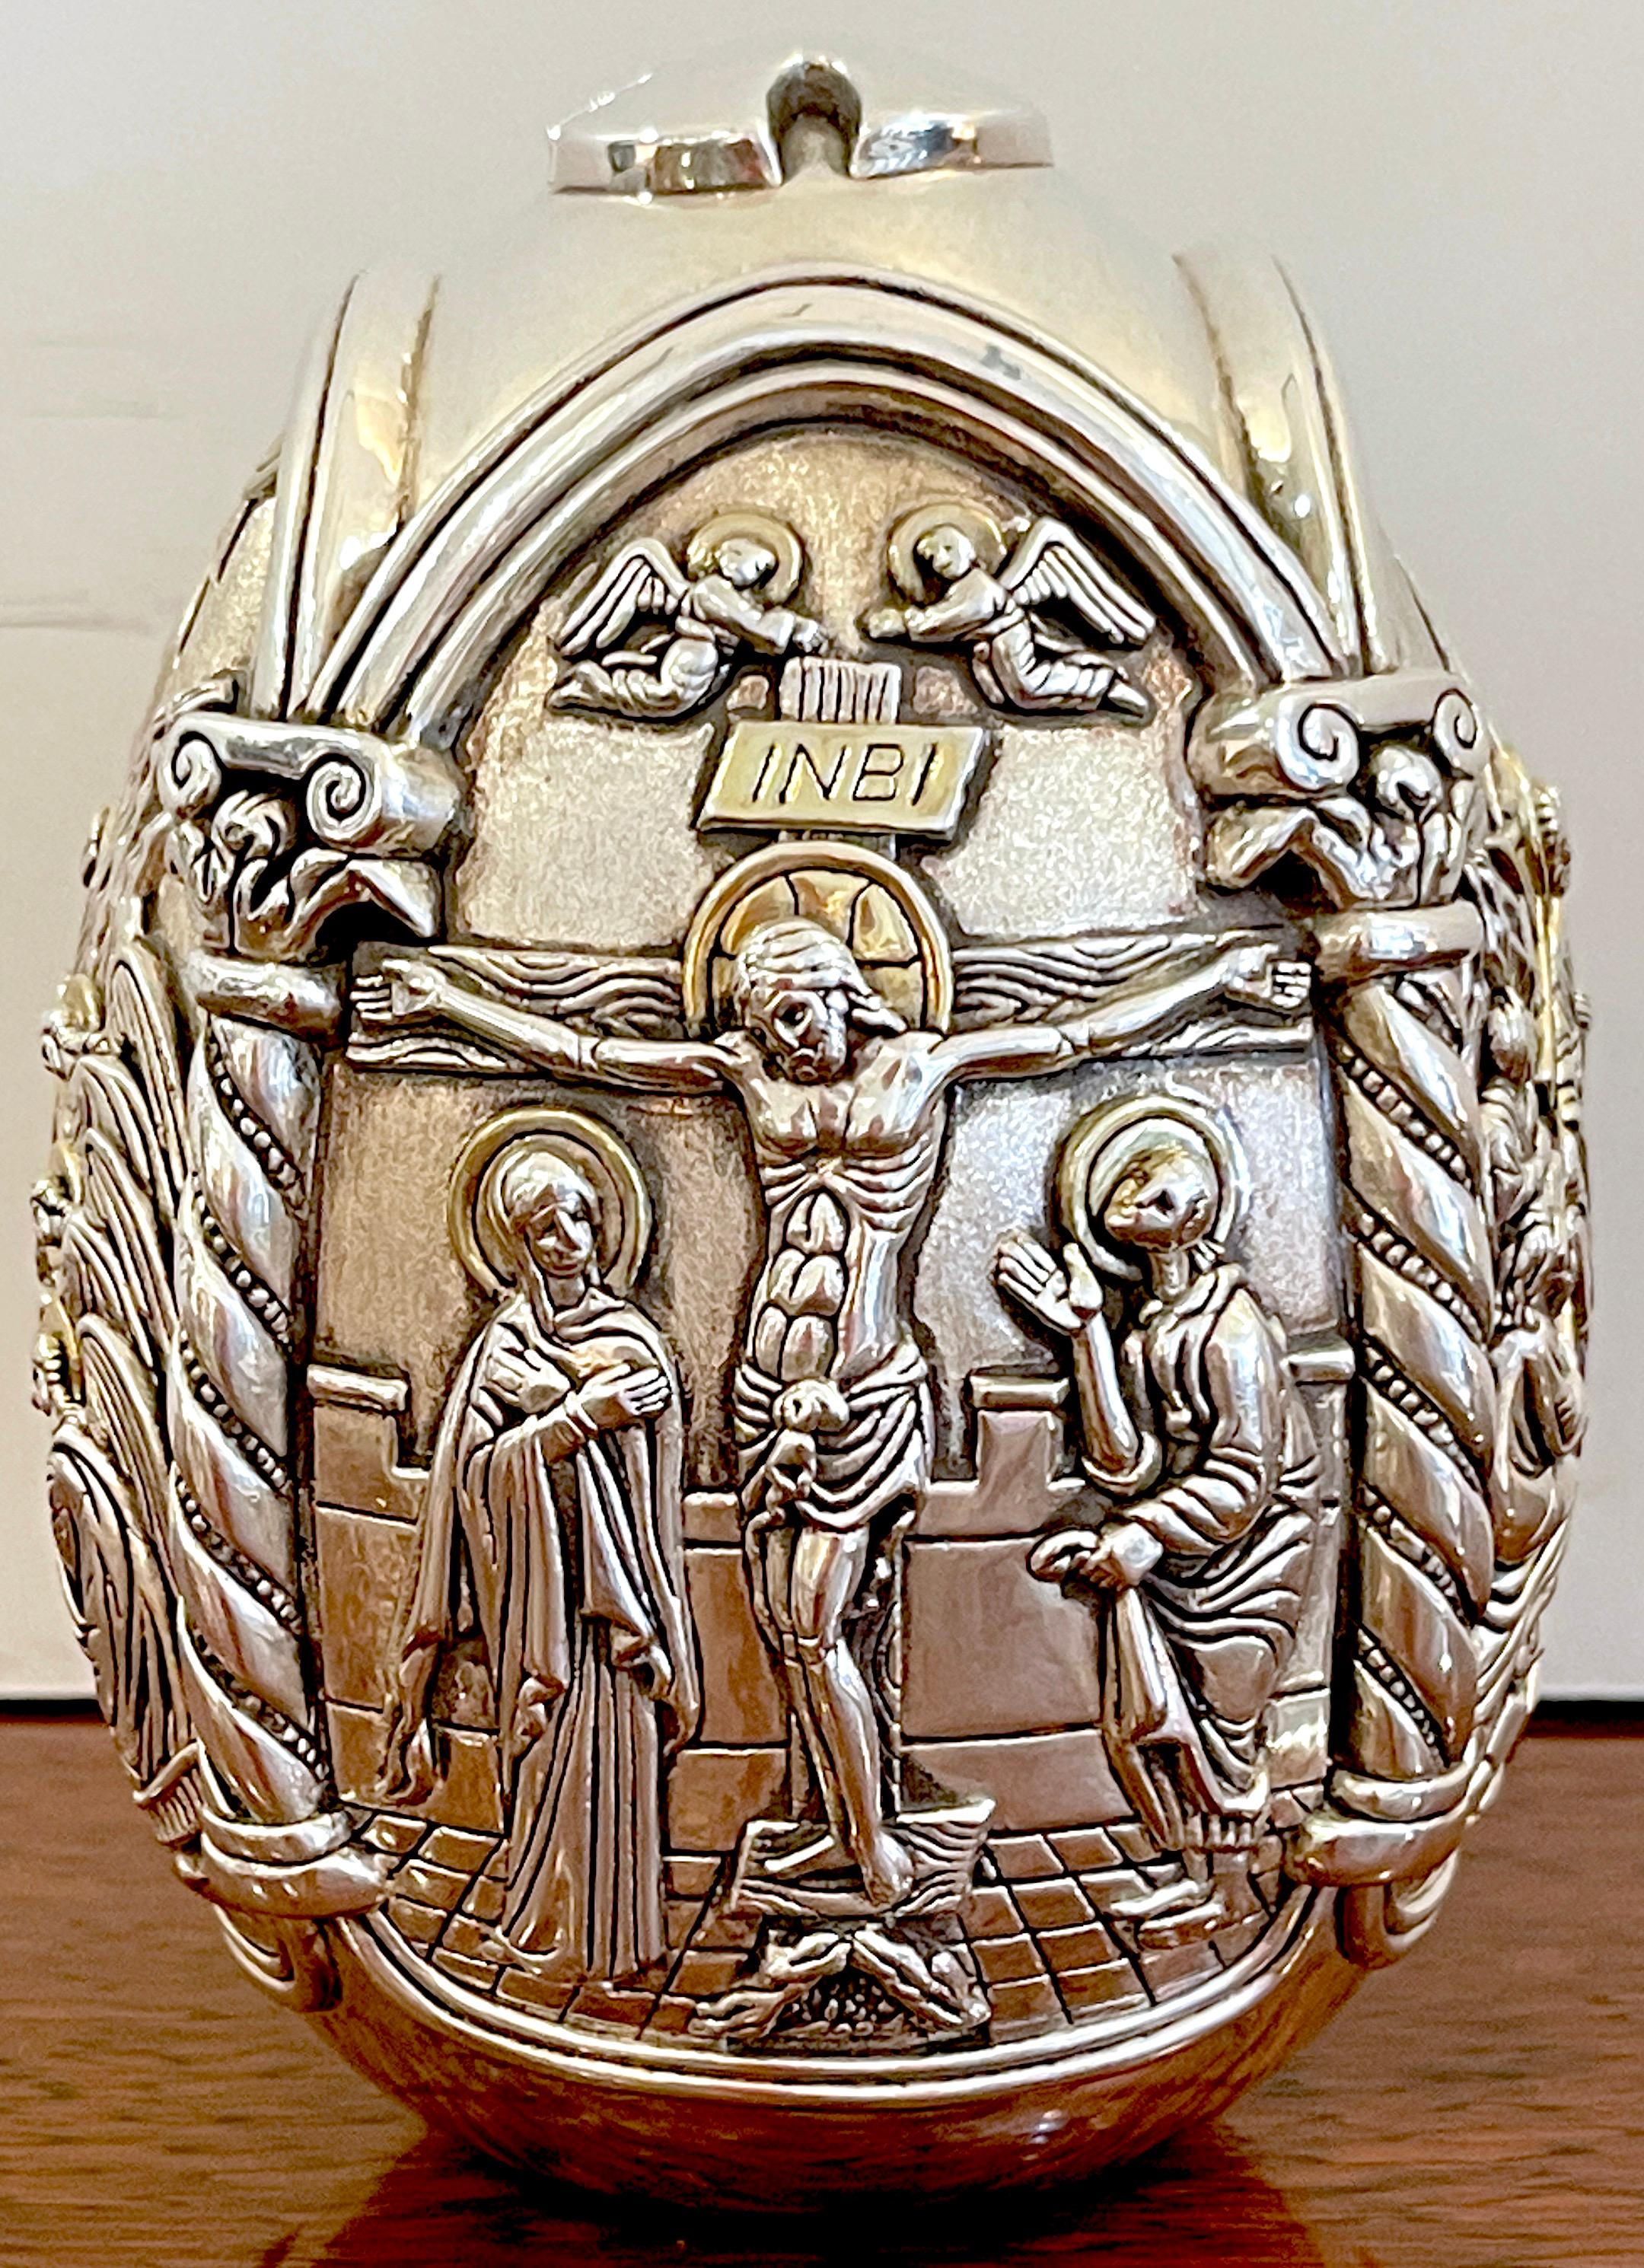 Greek sterling tetralogy icon egg sculpture of Christ's Life
Greece, Circa 1970s 
This intricate and highly detailed work consists of four depictions of events in Christs life. Specifically the sculpture displays The nativity, The crucifixion, The